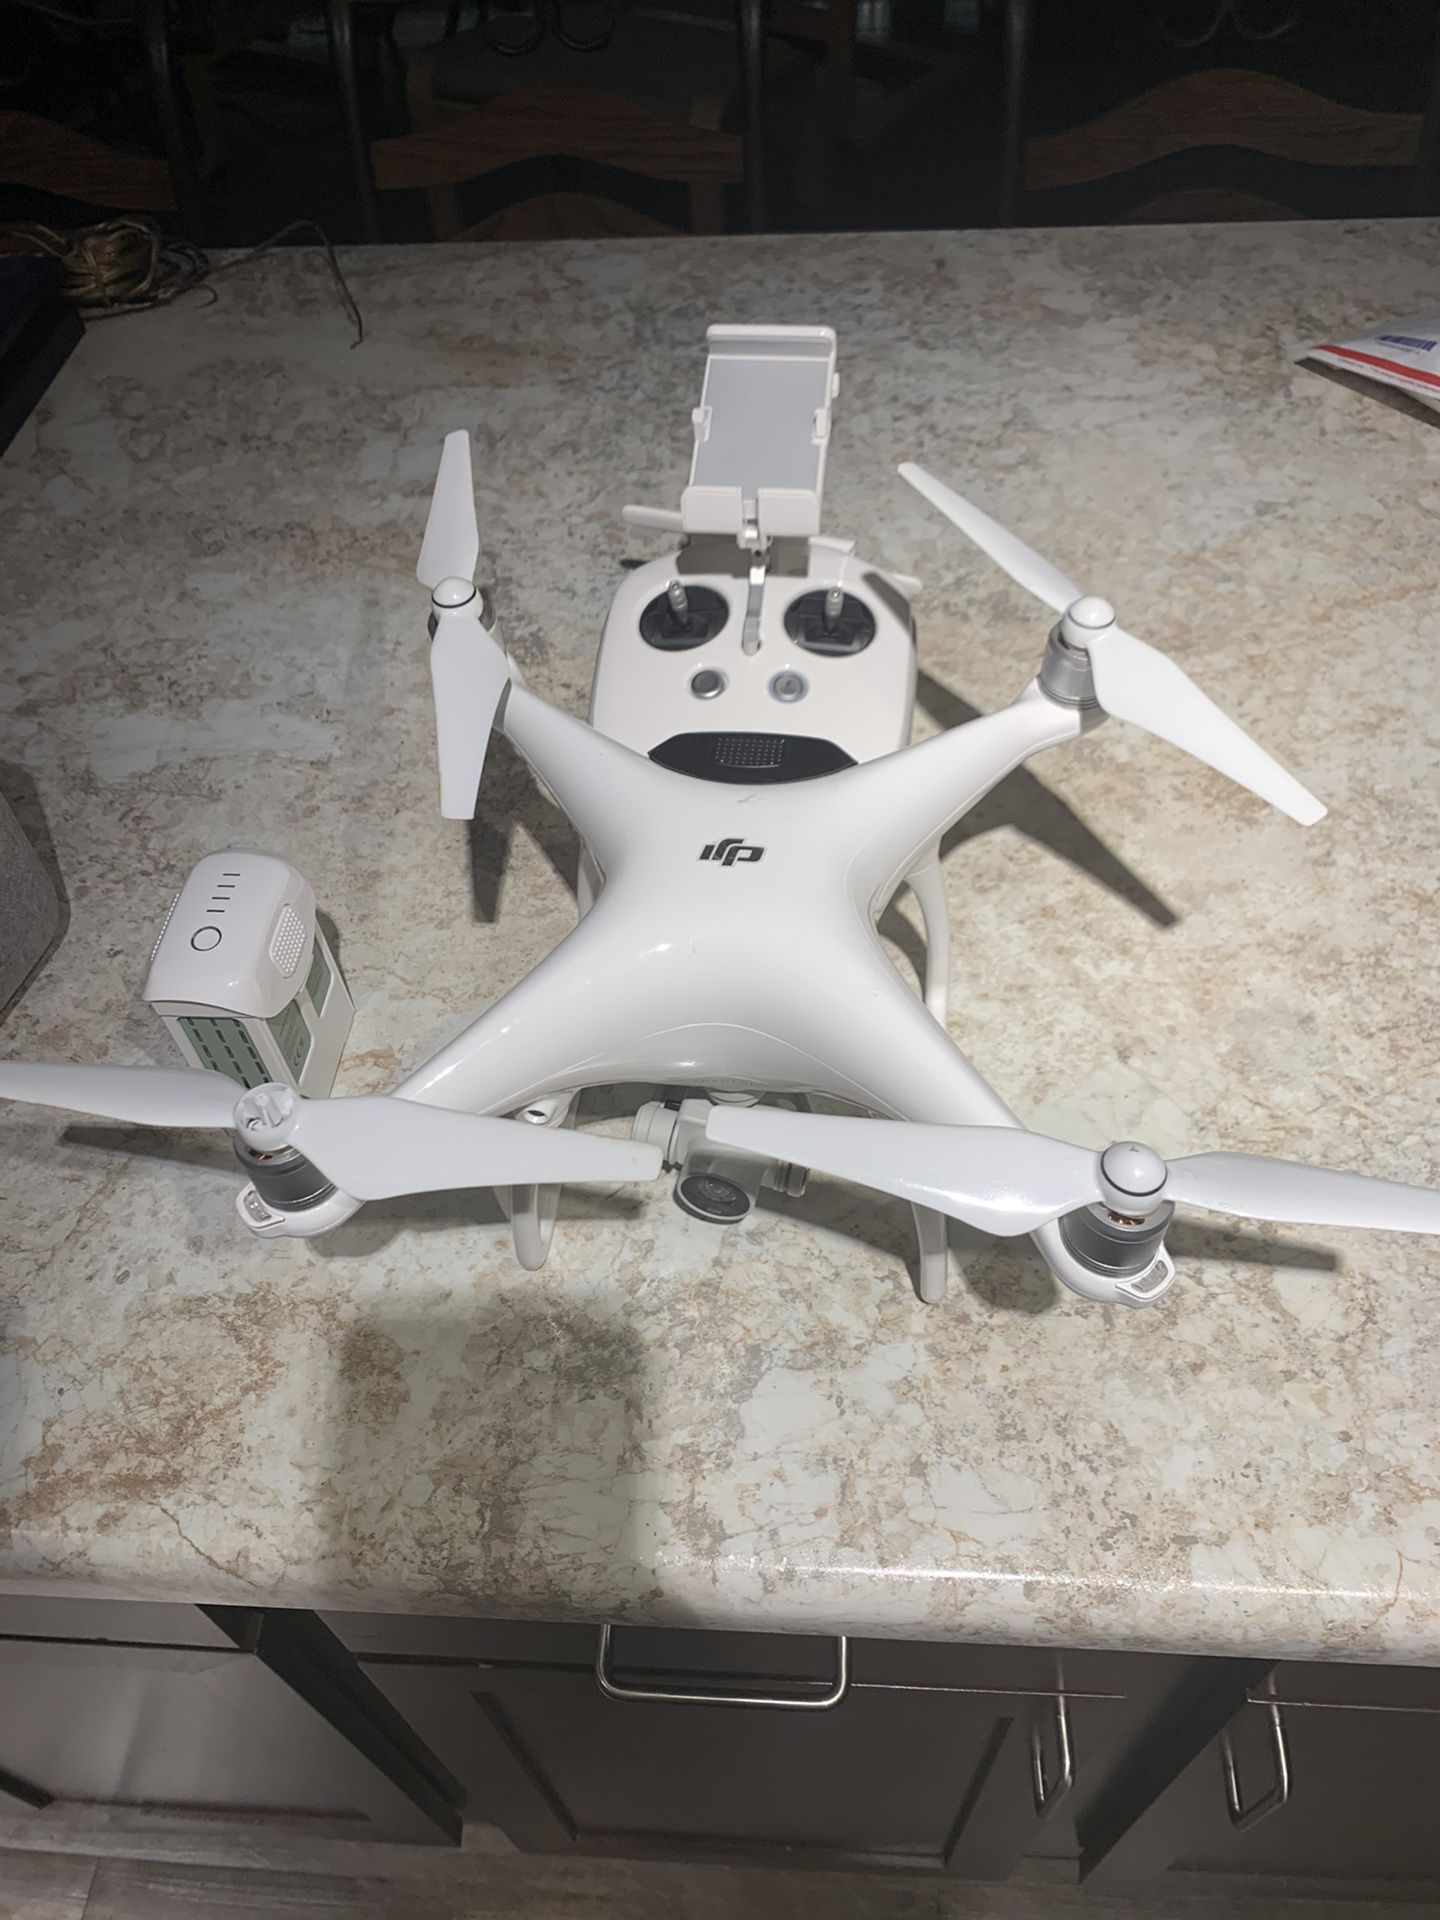 DJI Phantom 4 w/ extra battery, props, and Extreme 64GB SD